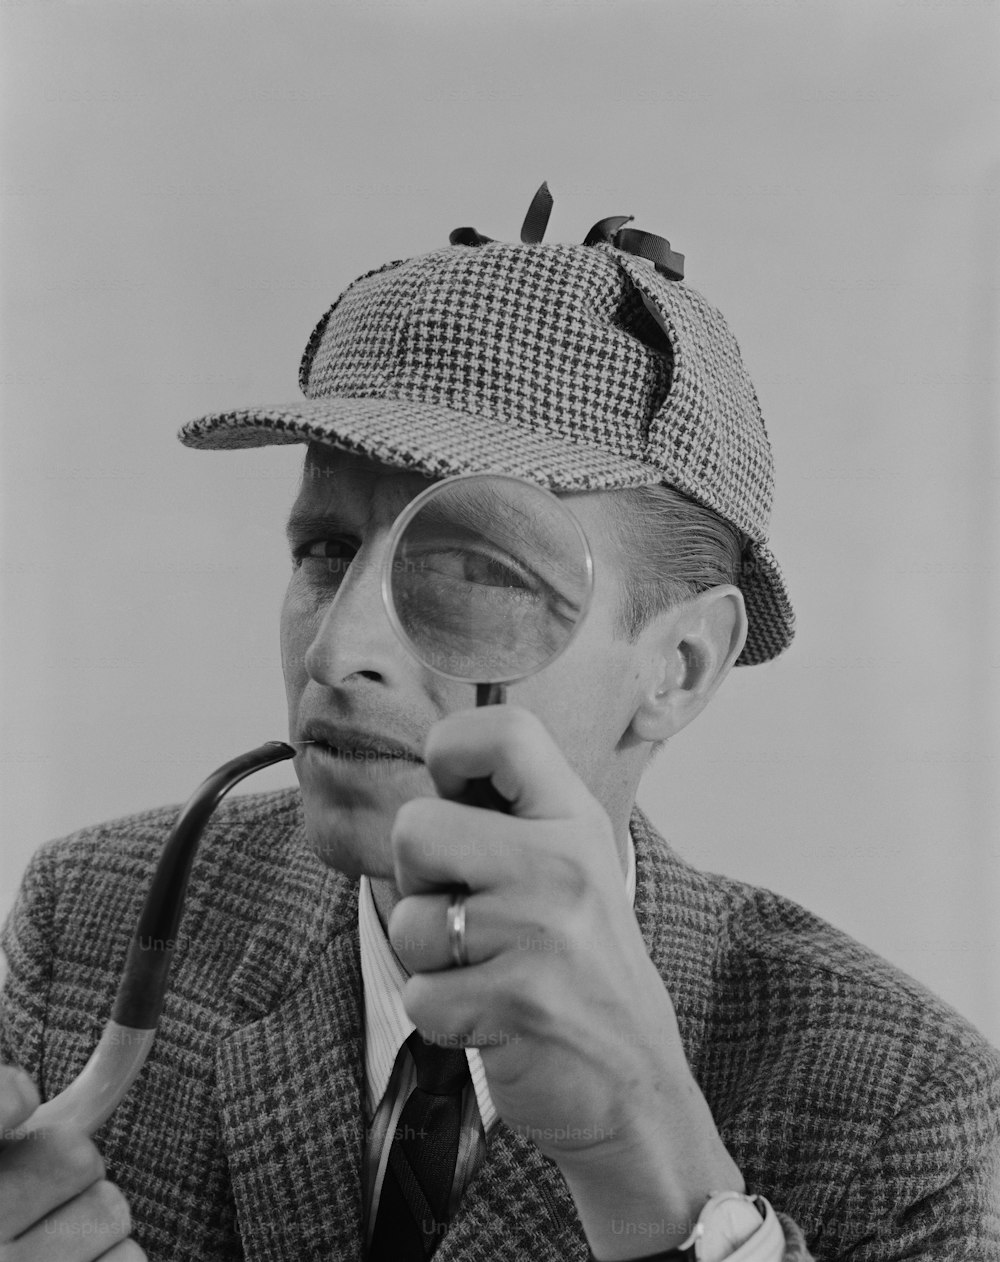 a man wearing a hat and holding a magnifying glass